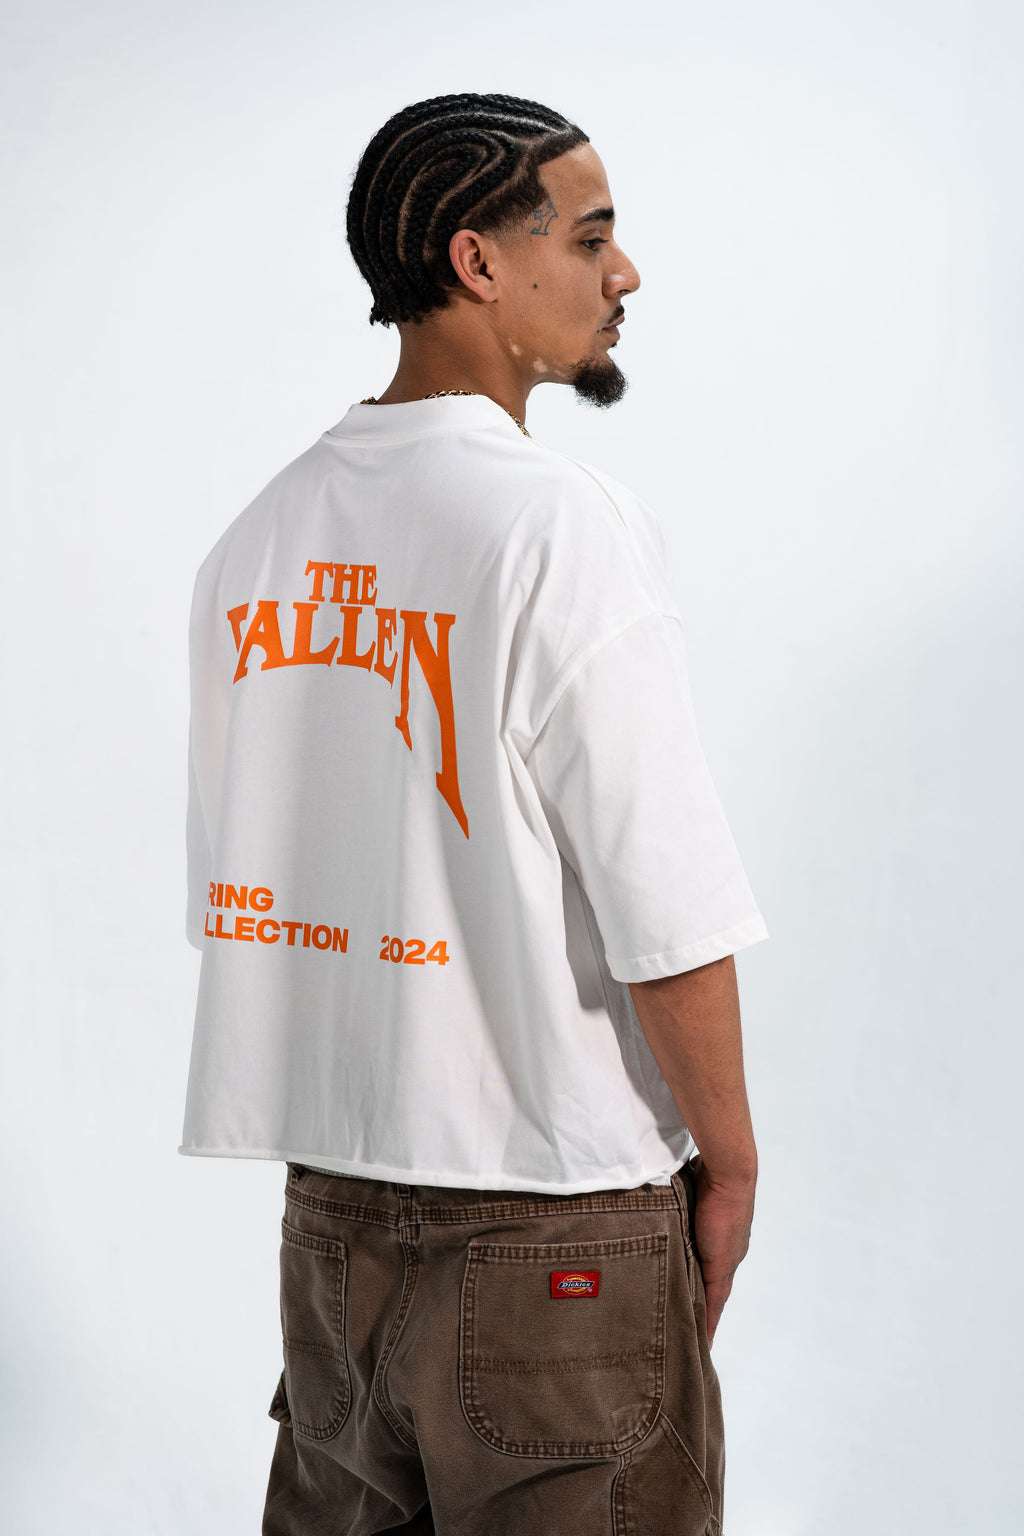 The Fallen Clothing Spring 2024 Collection Cropped Tee